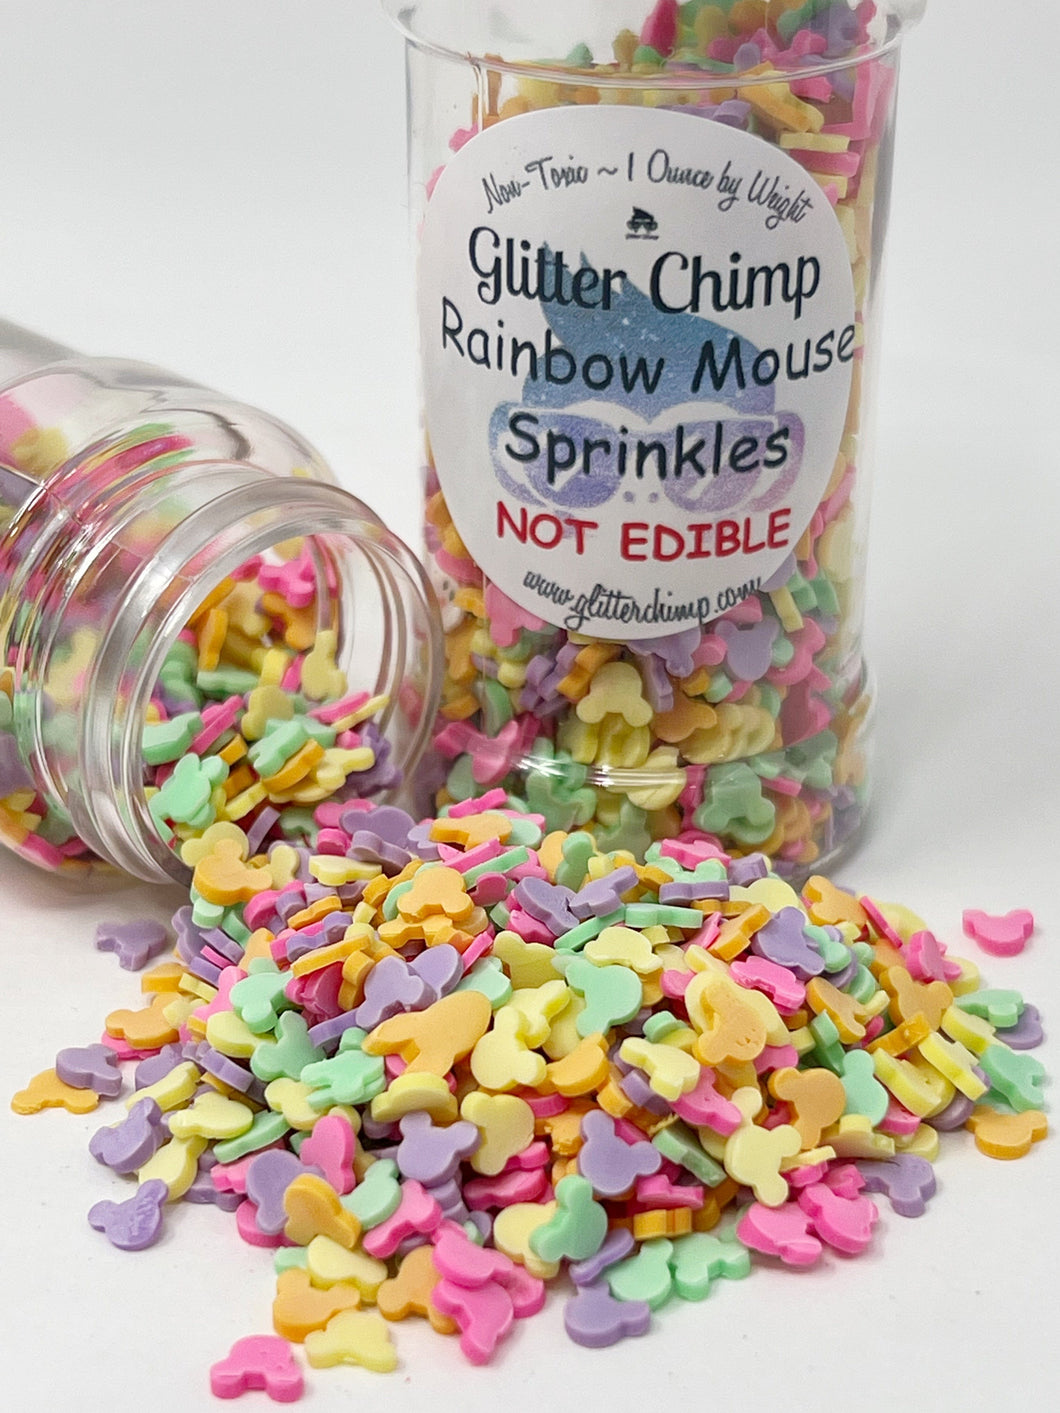 Rainbow Mouse Sprinkles - Faux Craft Toppings